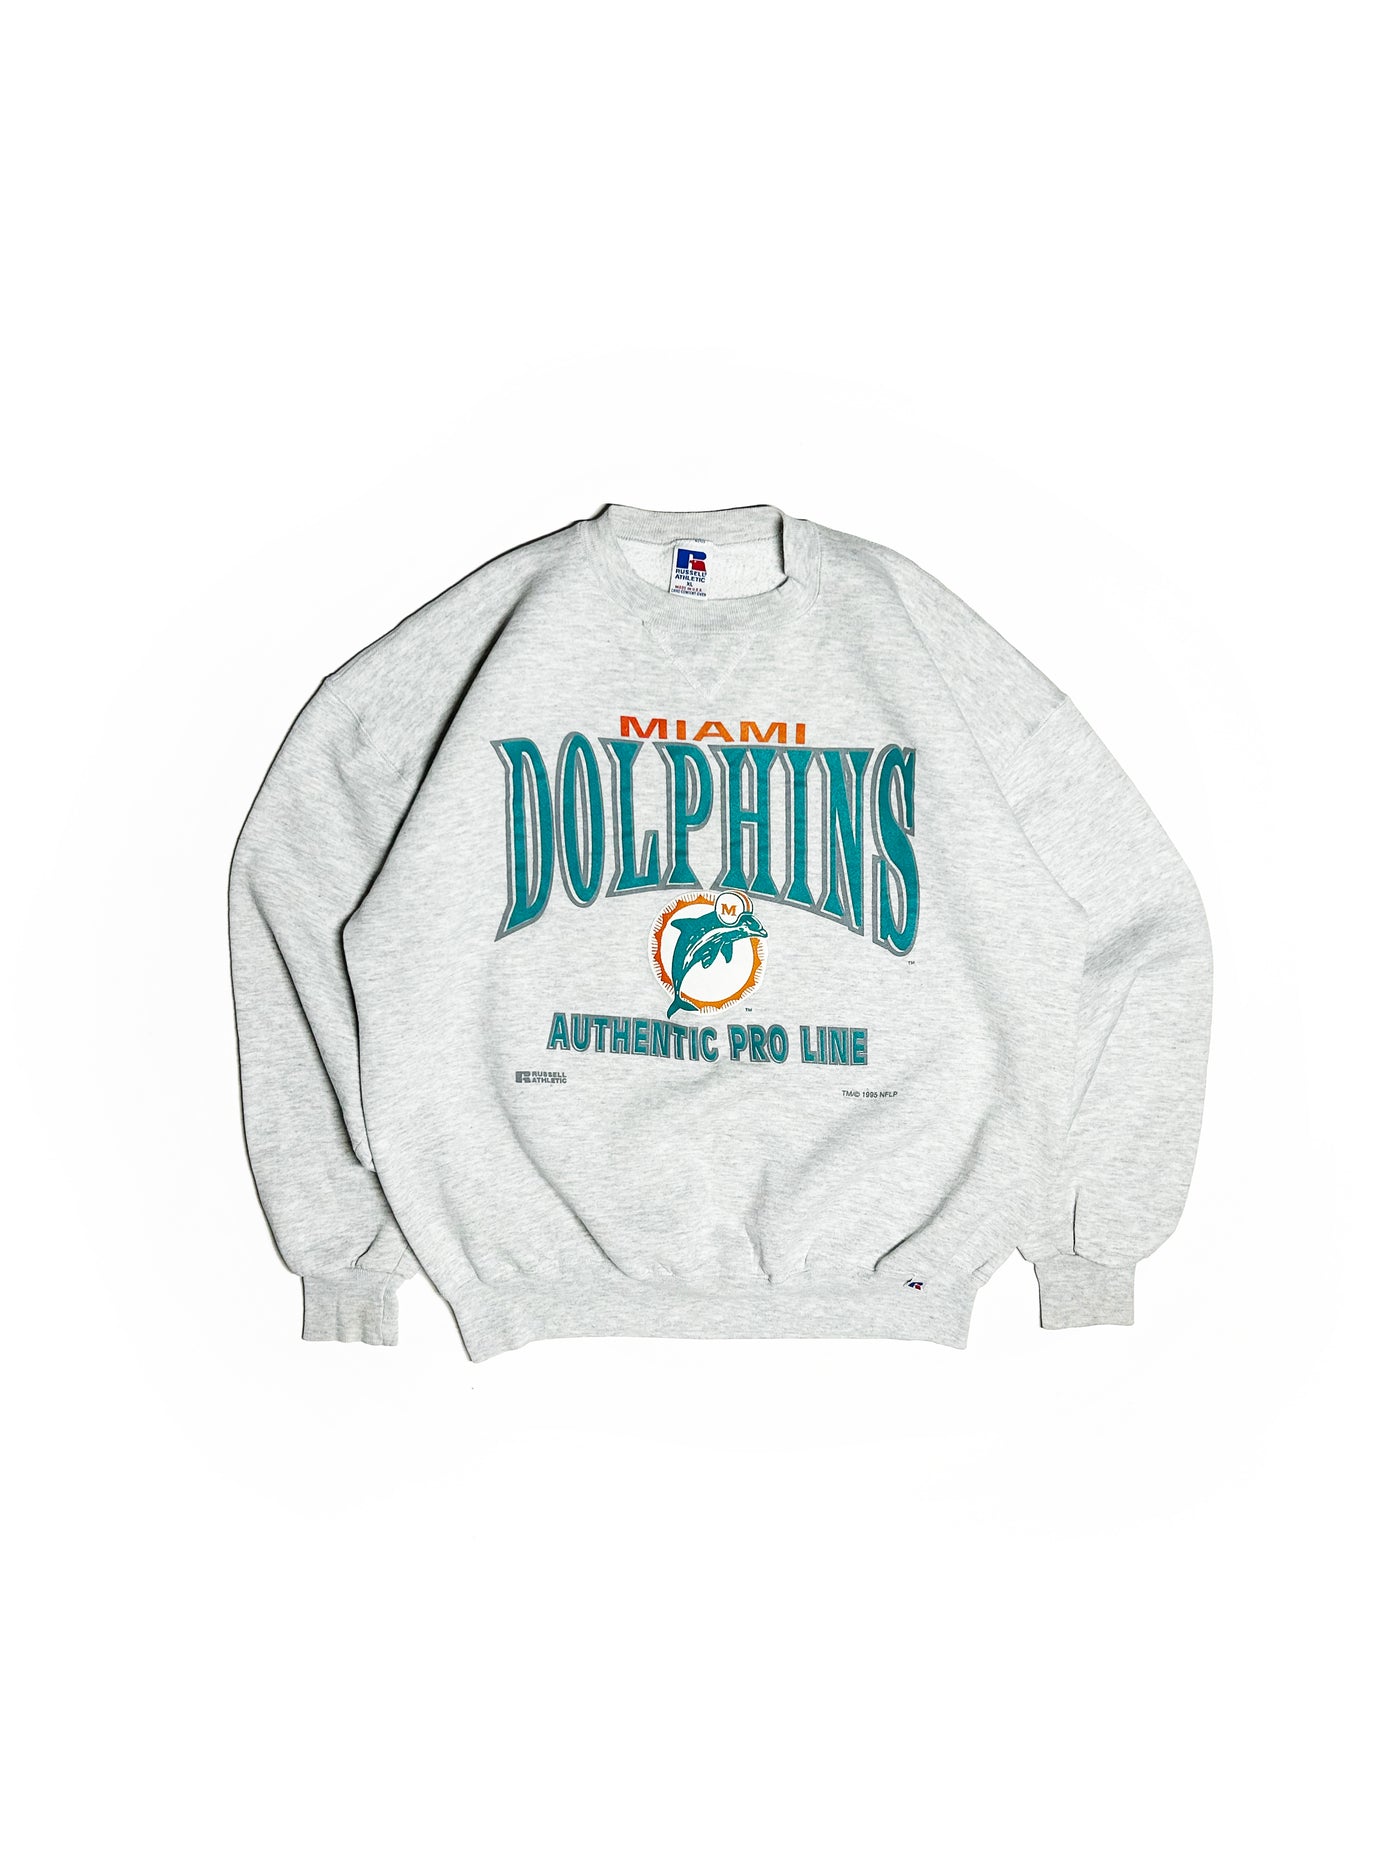 Vintage 1995 Miami Dolphins Russell Athletic Crewneck